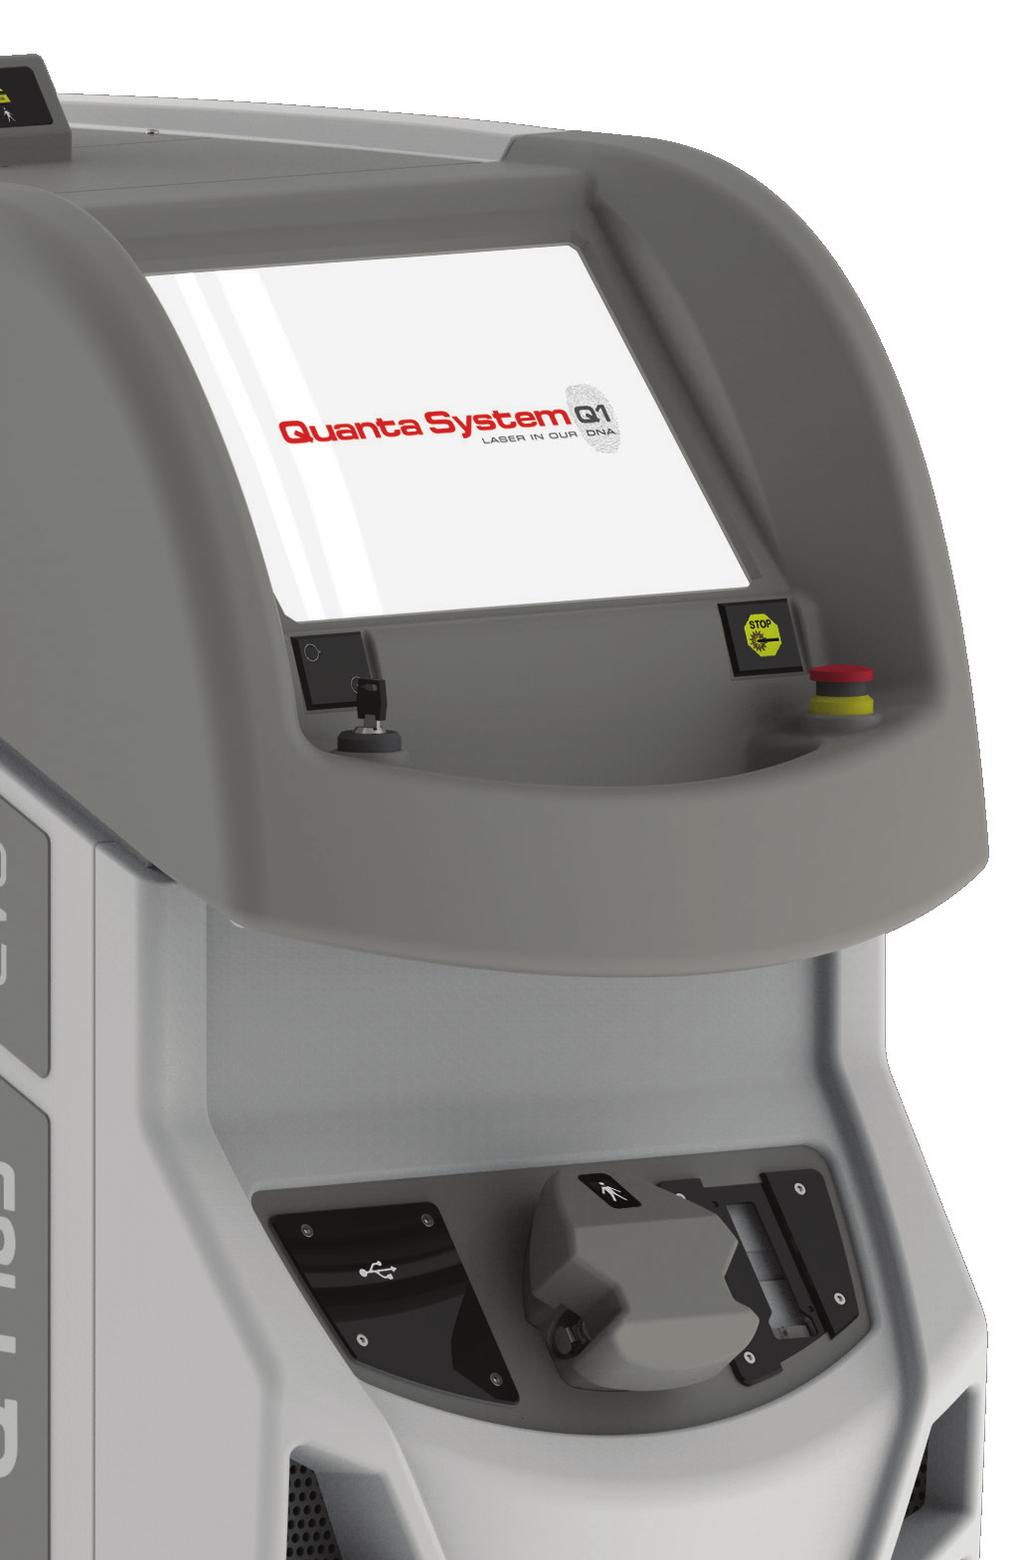 Q-SWITCHED LASER PLATFORM TAILORED TO YOUR NEEDS Q-Plus EVO is based on a Q-Switched laser technology that ensures a great versatility in clinical